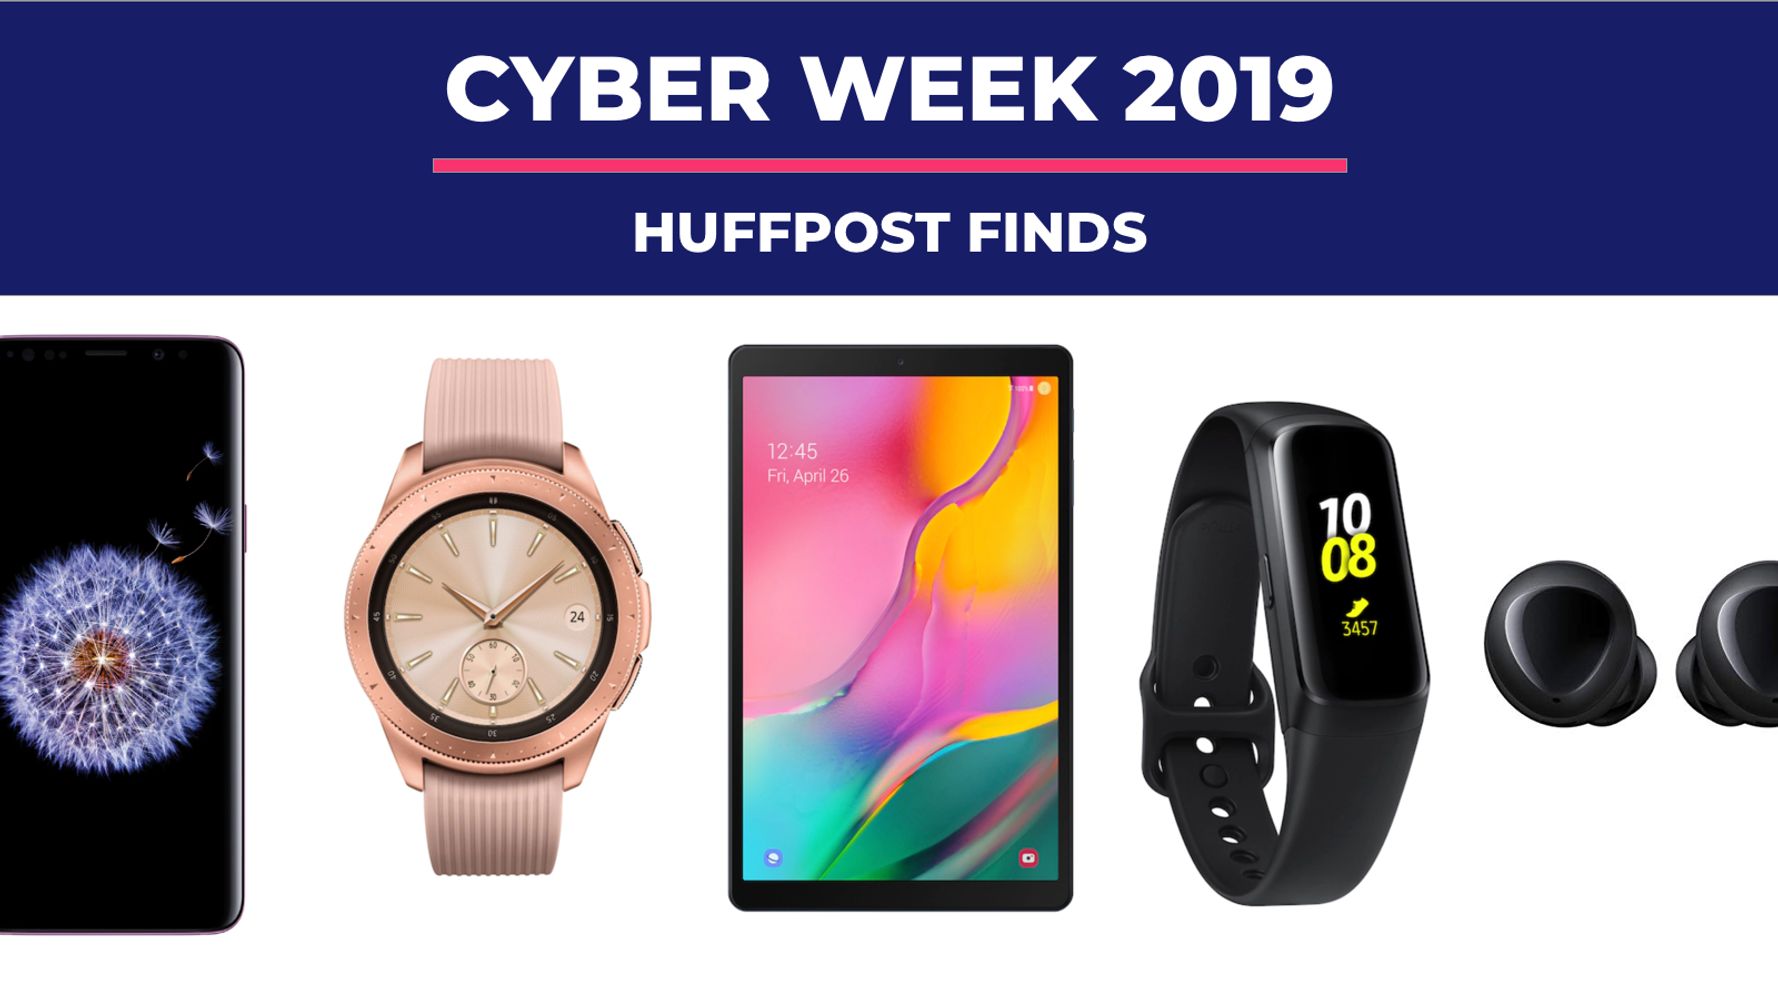 Black Friday 2019 Deals On Samsung Galaxy Phones, Tablets and More | HuffPost Canada Home & Living